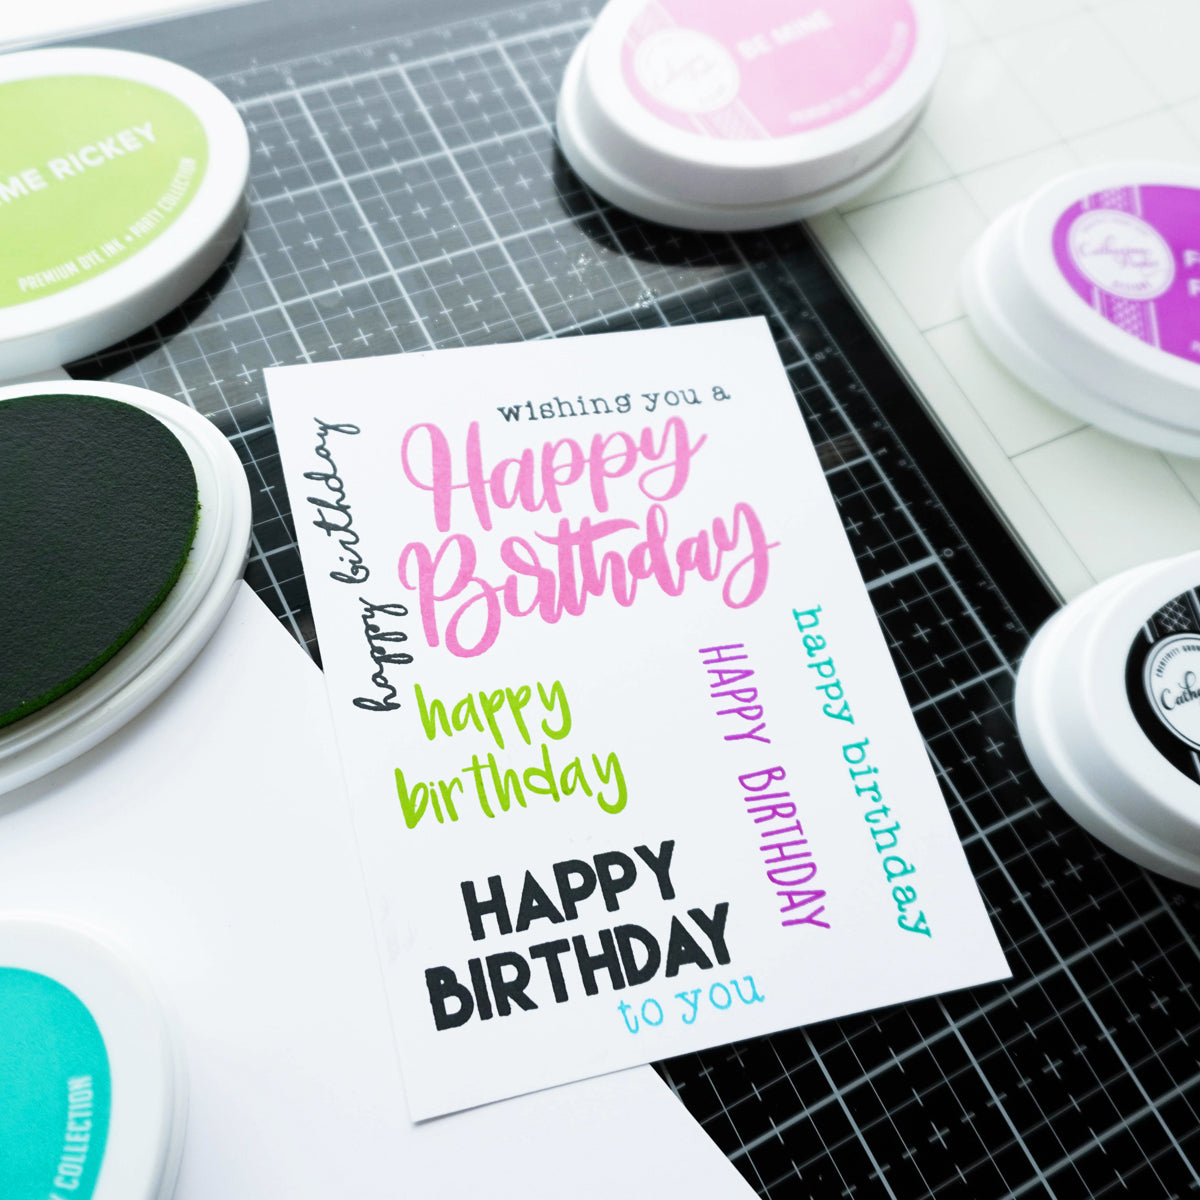 Catherine Pooler Designs - Clear Stamps - Happy Birthday Many Ways